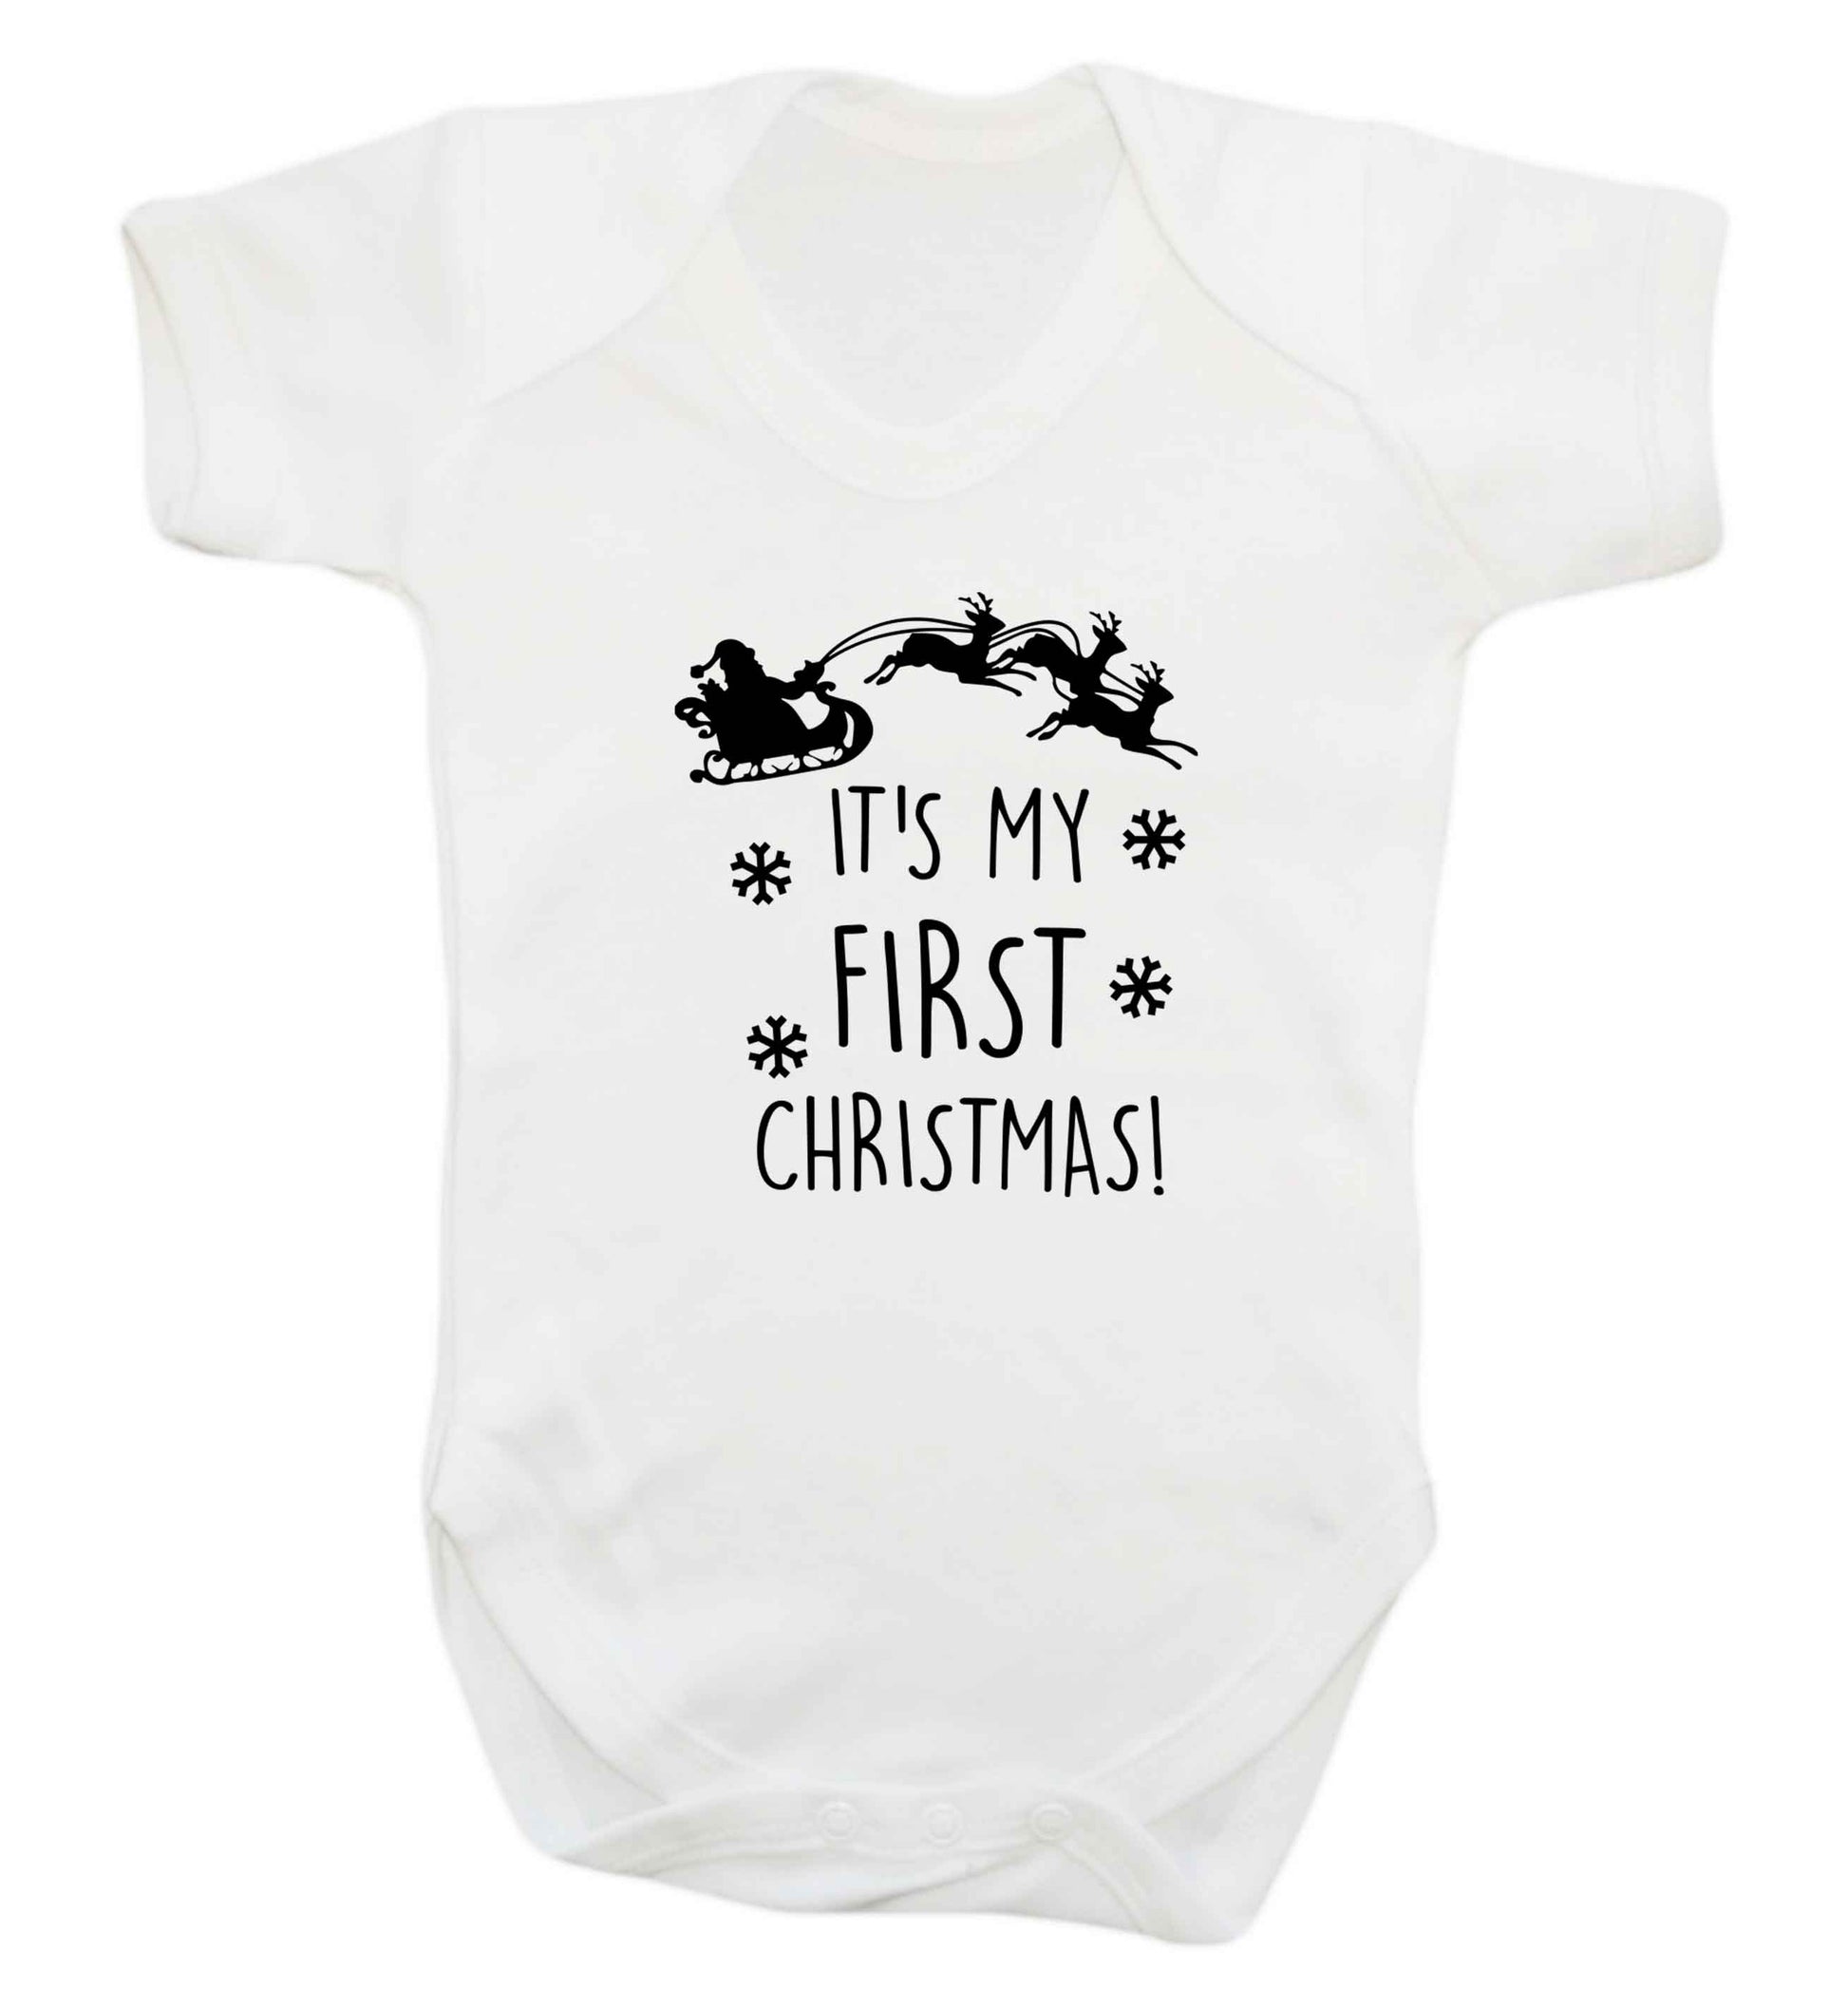 It's my first Christmas - Santa sleigh text baby vest white 18-24 months